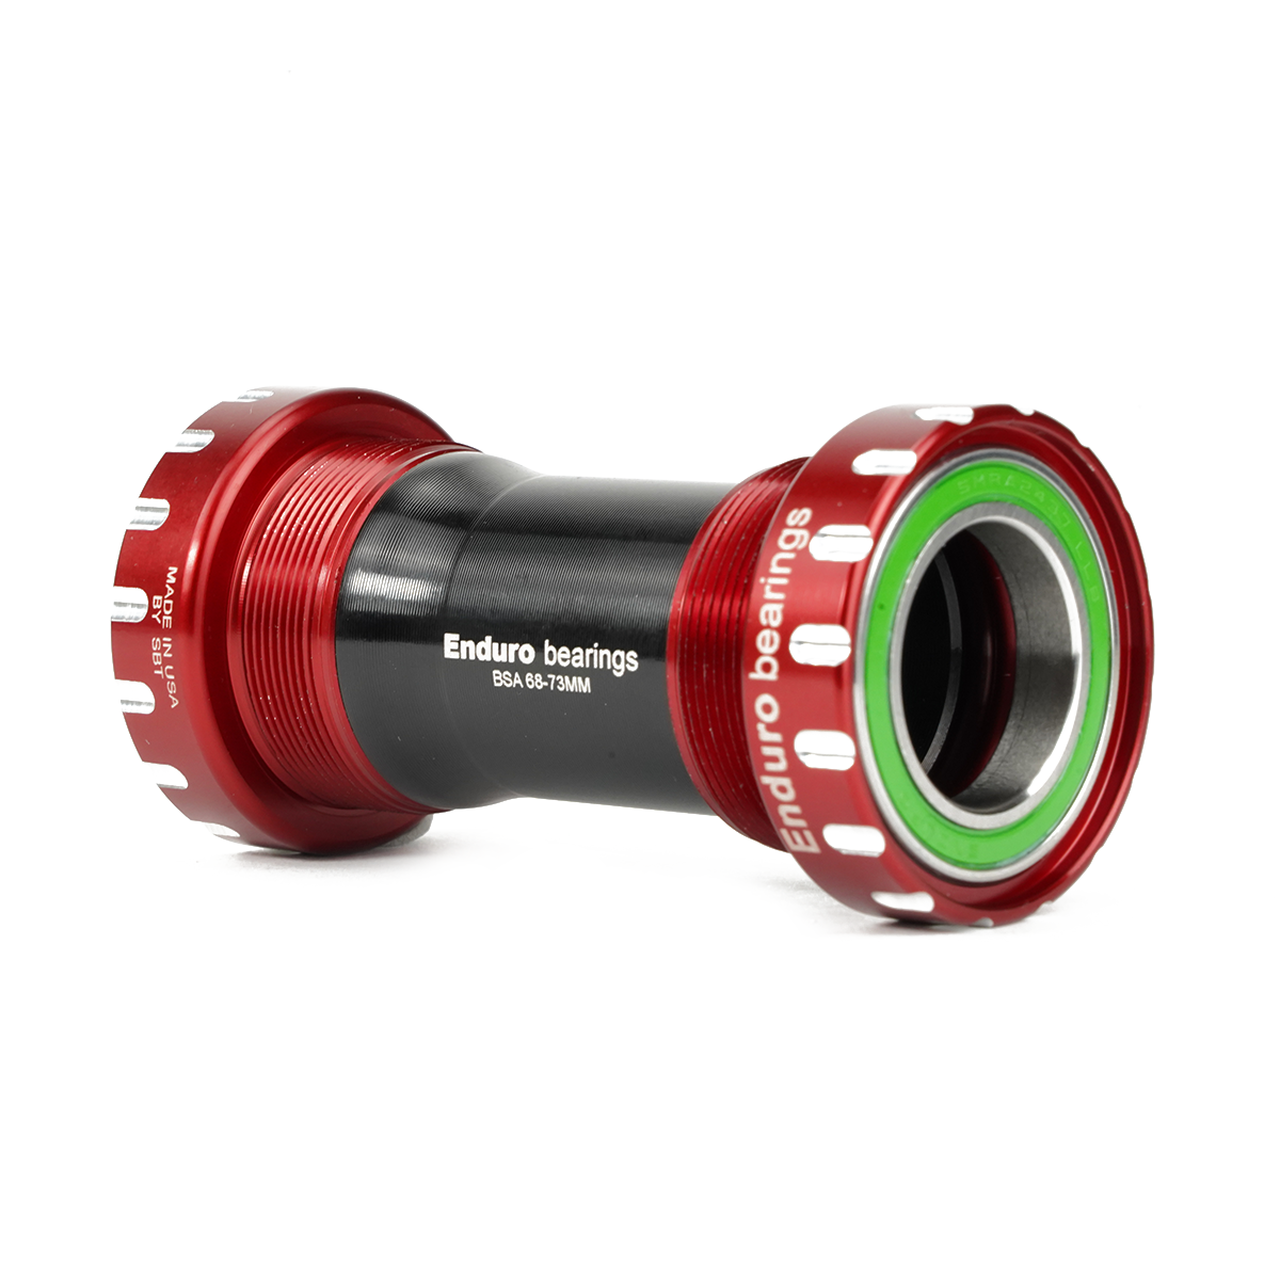 Enduro BKS-6036 - BSA Thread-In, Angular Contact, Stainless Steel Bottom Bracket for Shimano 24mm Road Cranksets